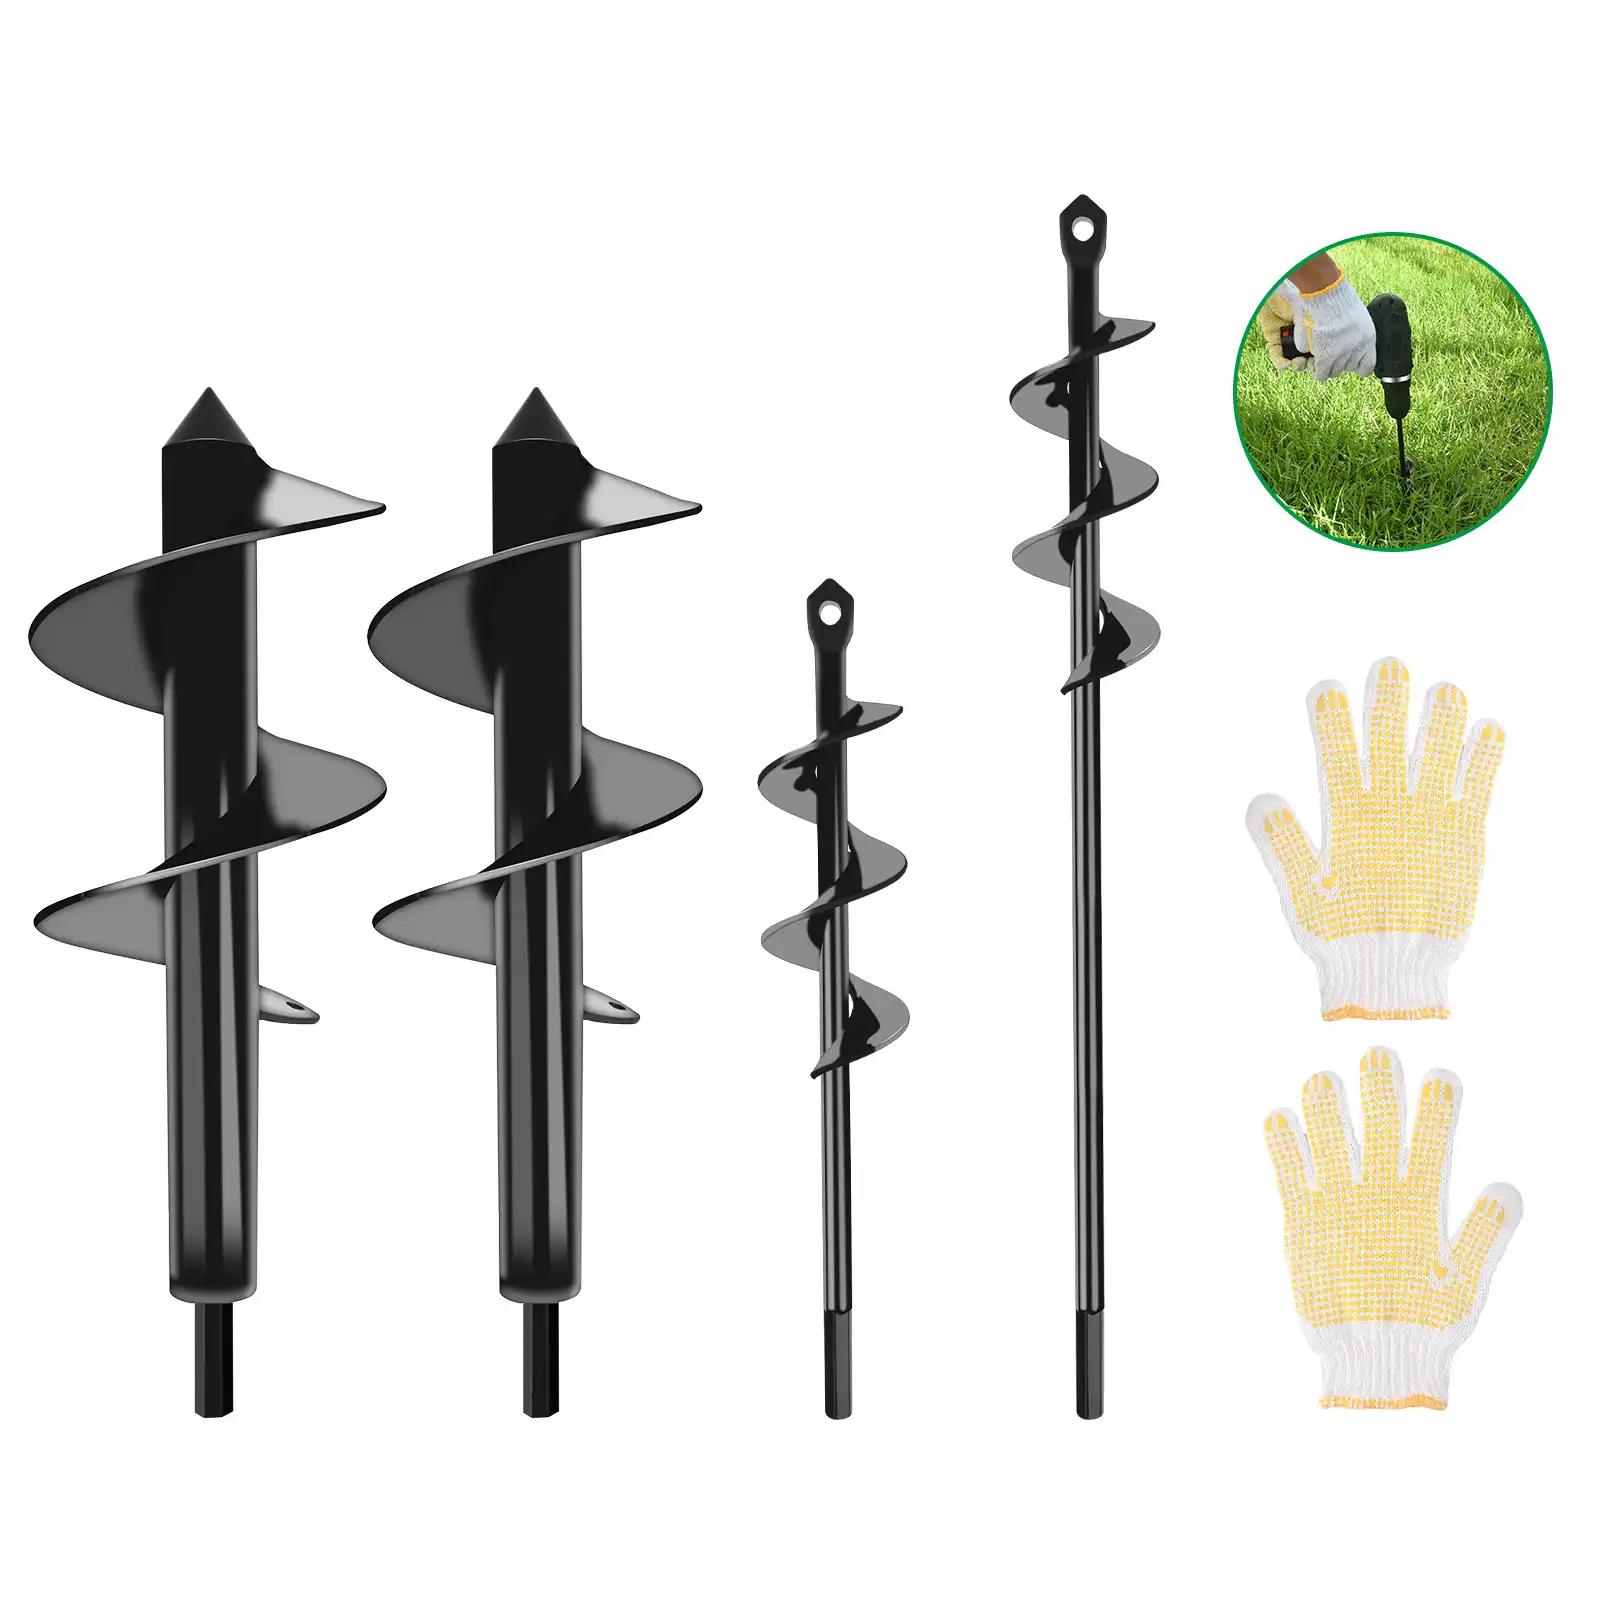 EVEAGE Auger Drill Bit, Garden Auger Drill Bit For Planting, Bulb Auger Drill Planter Suits For Bulbs Vegetables Flower Potted